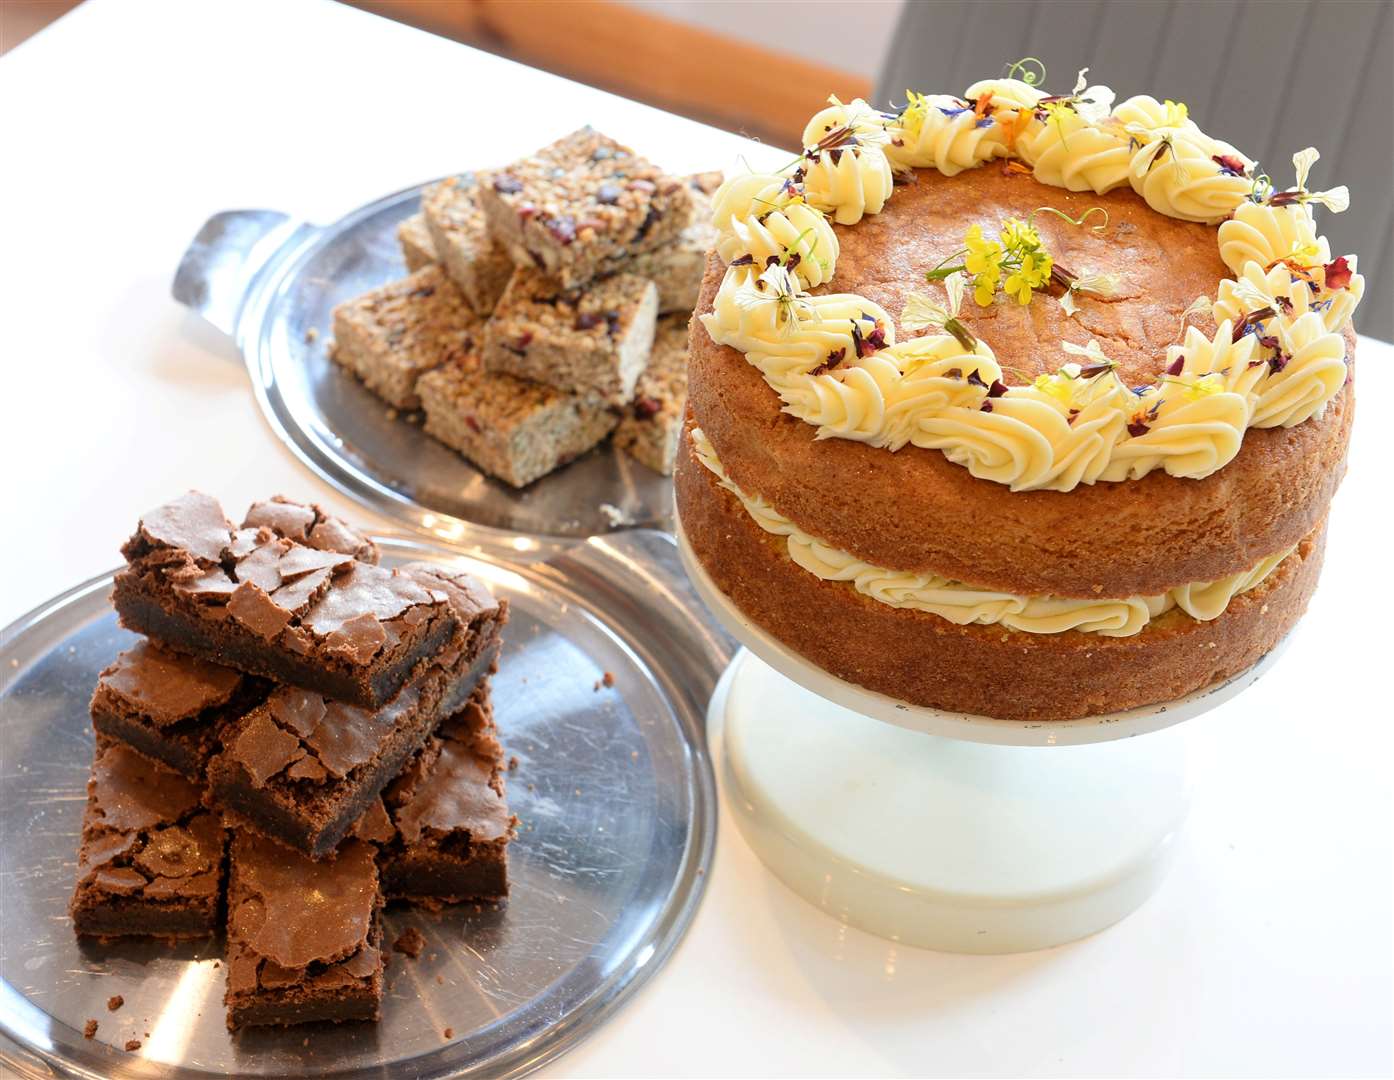 Some of the delicious in-house baking on offer. Picture: Gary Anthony